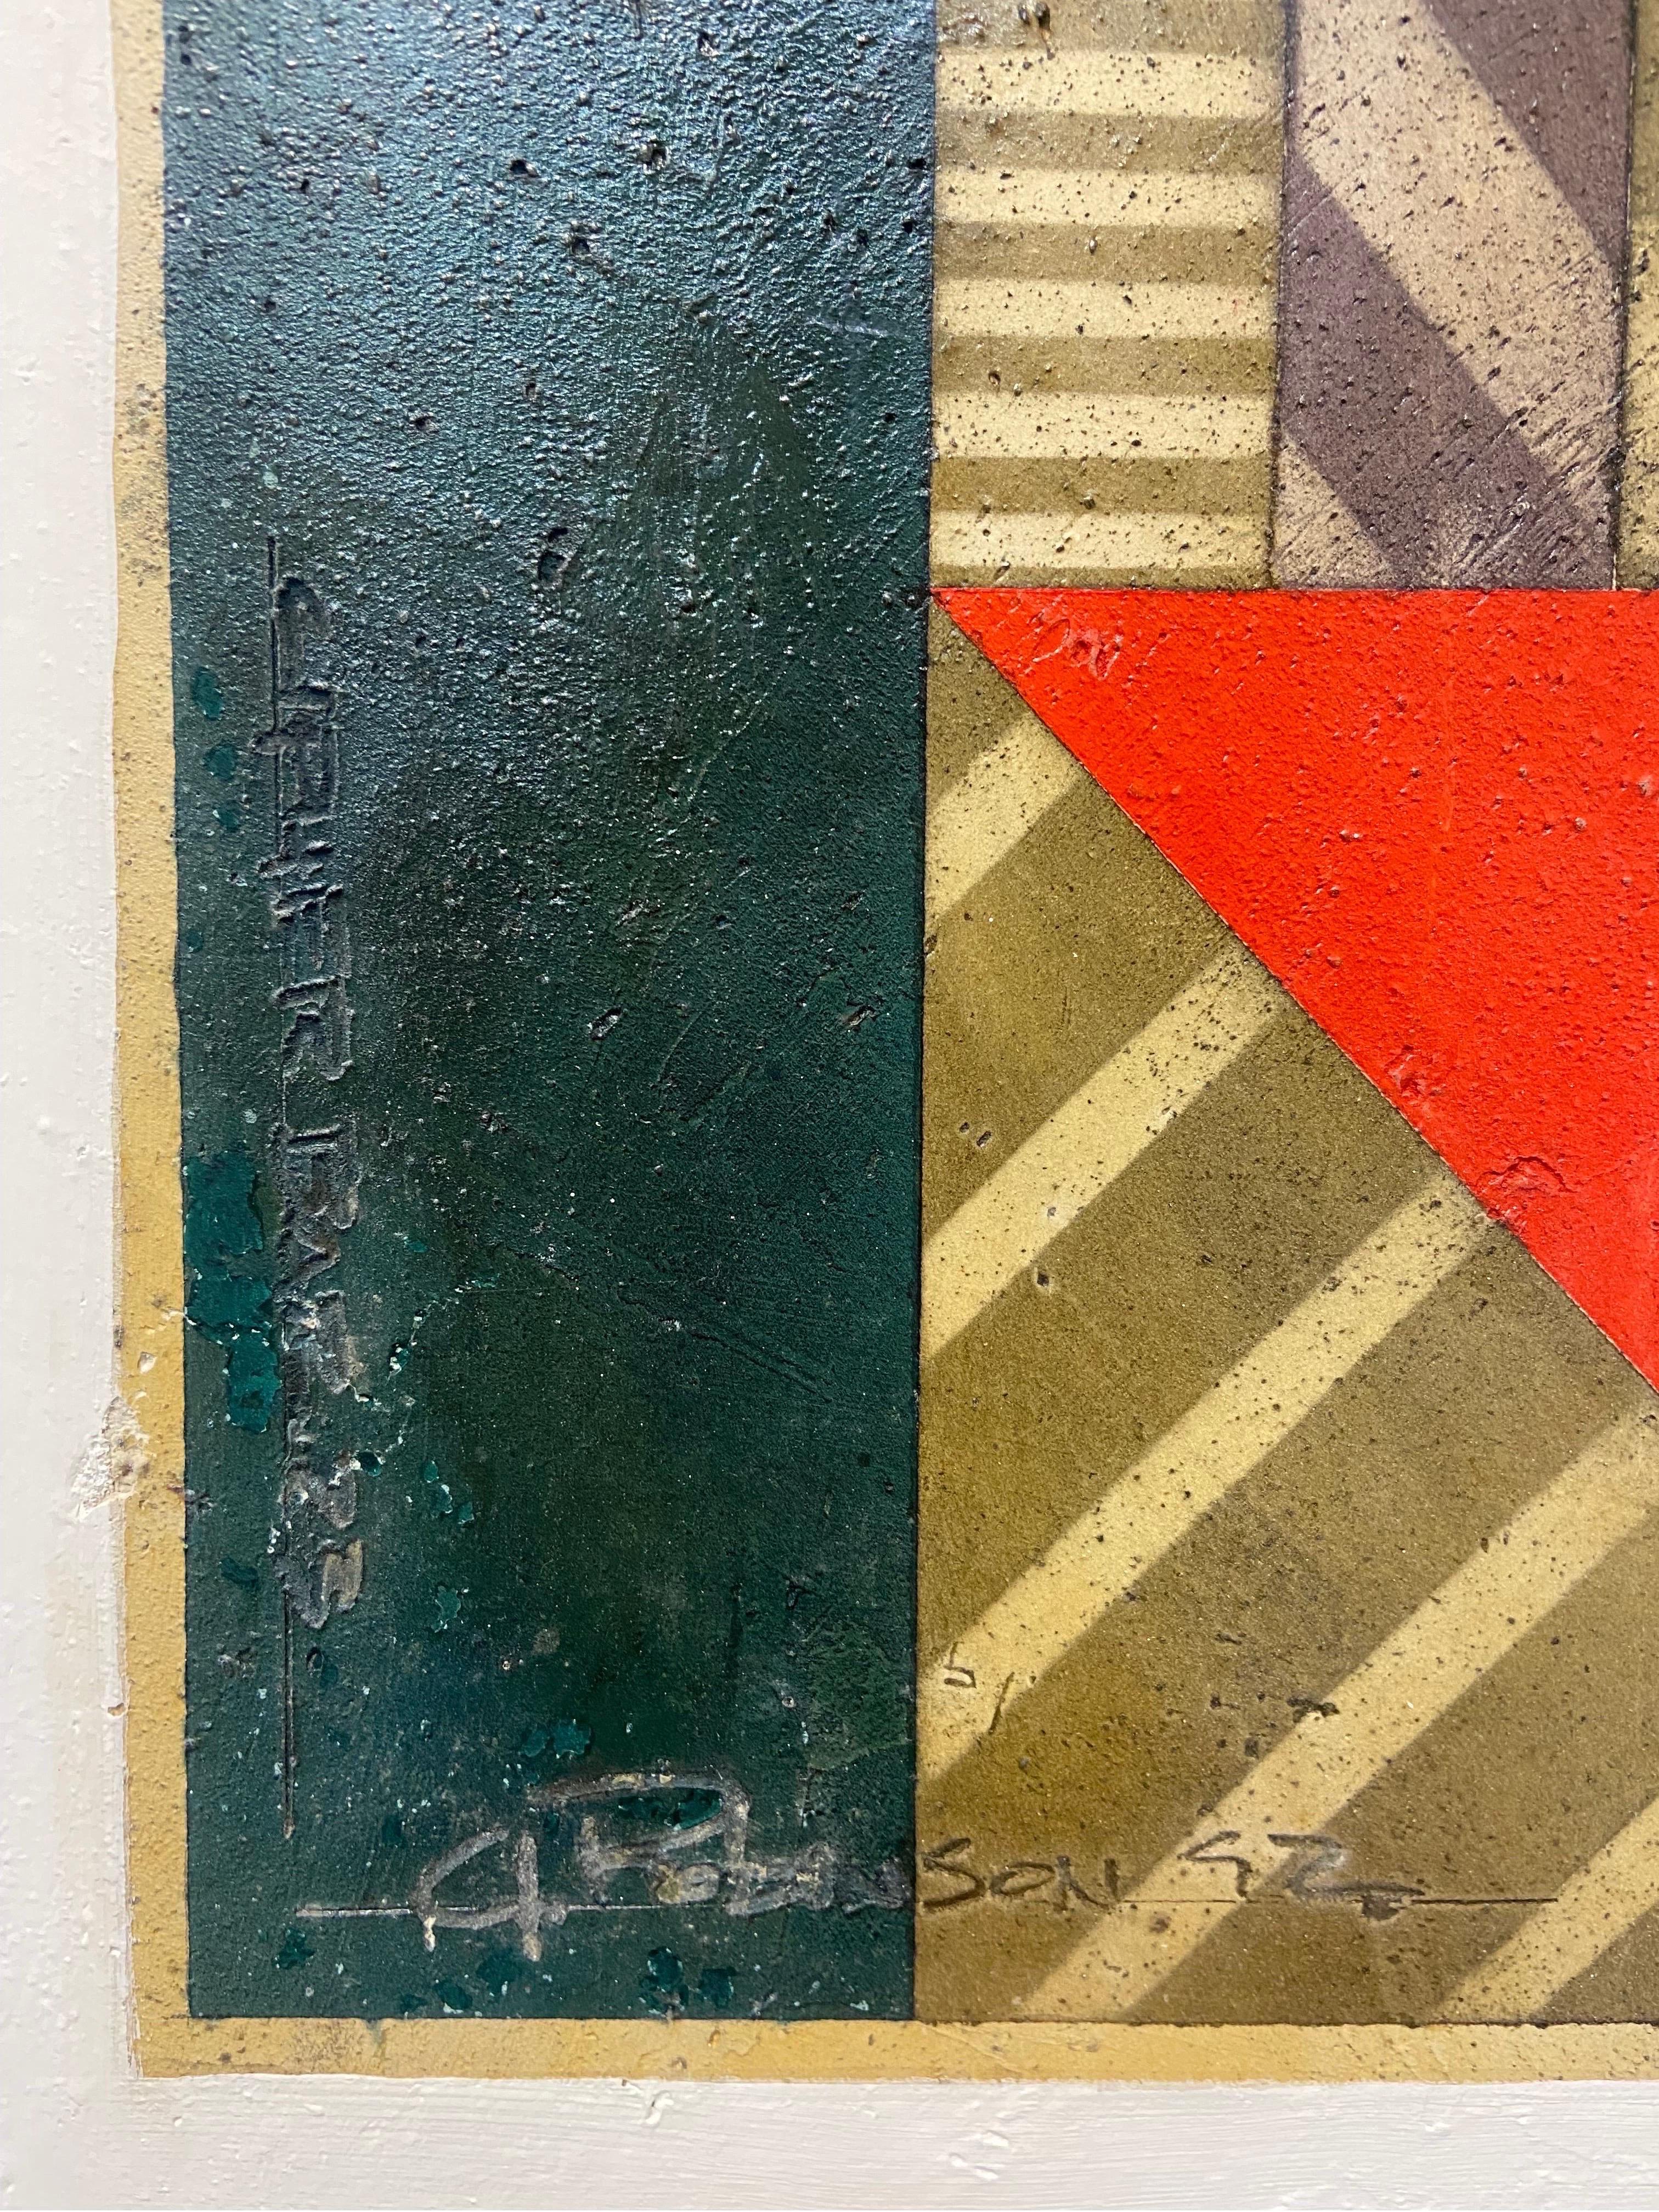 A pair of large, vintage, circa 1992, signed and titled post modern style geometric abstract paintings by contemporary American artist Gregg Robinson (born 1948). In the artist's own words regarding his work, 